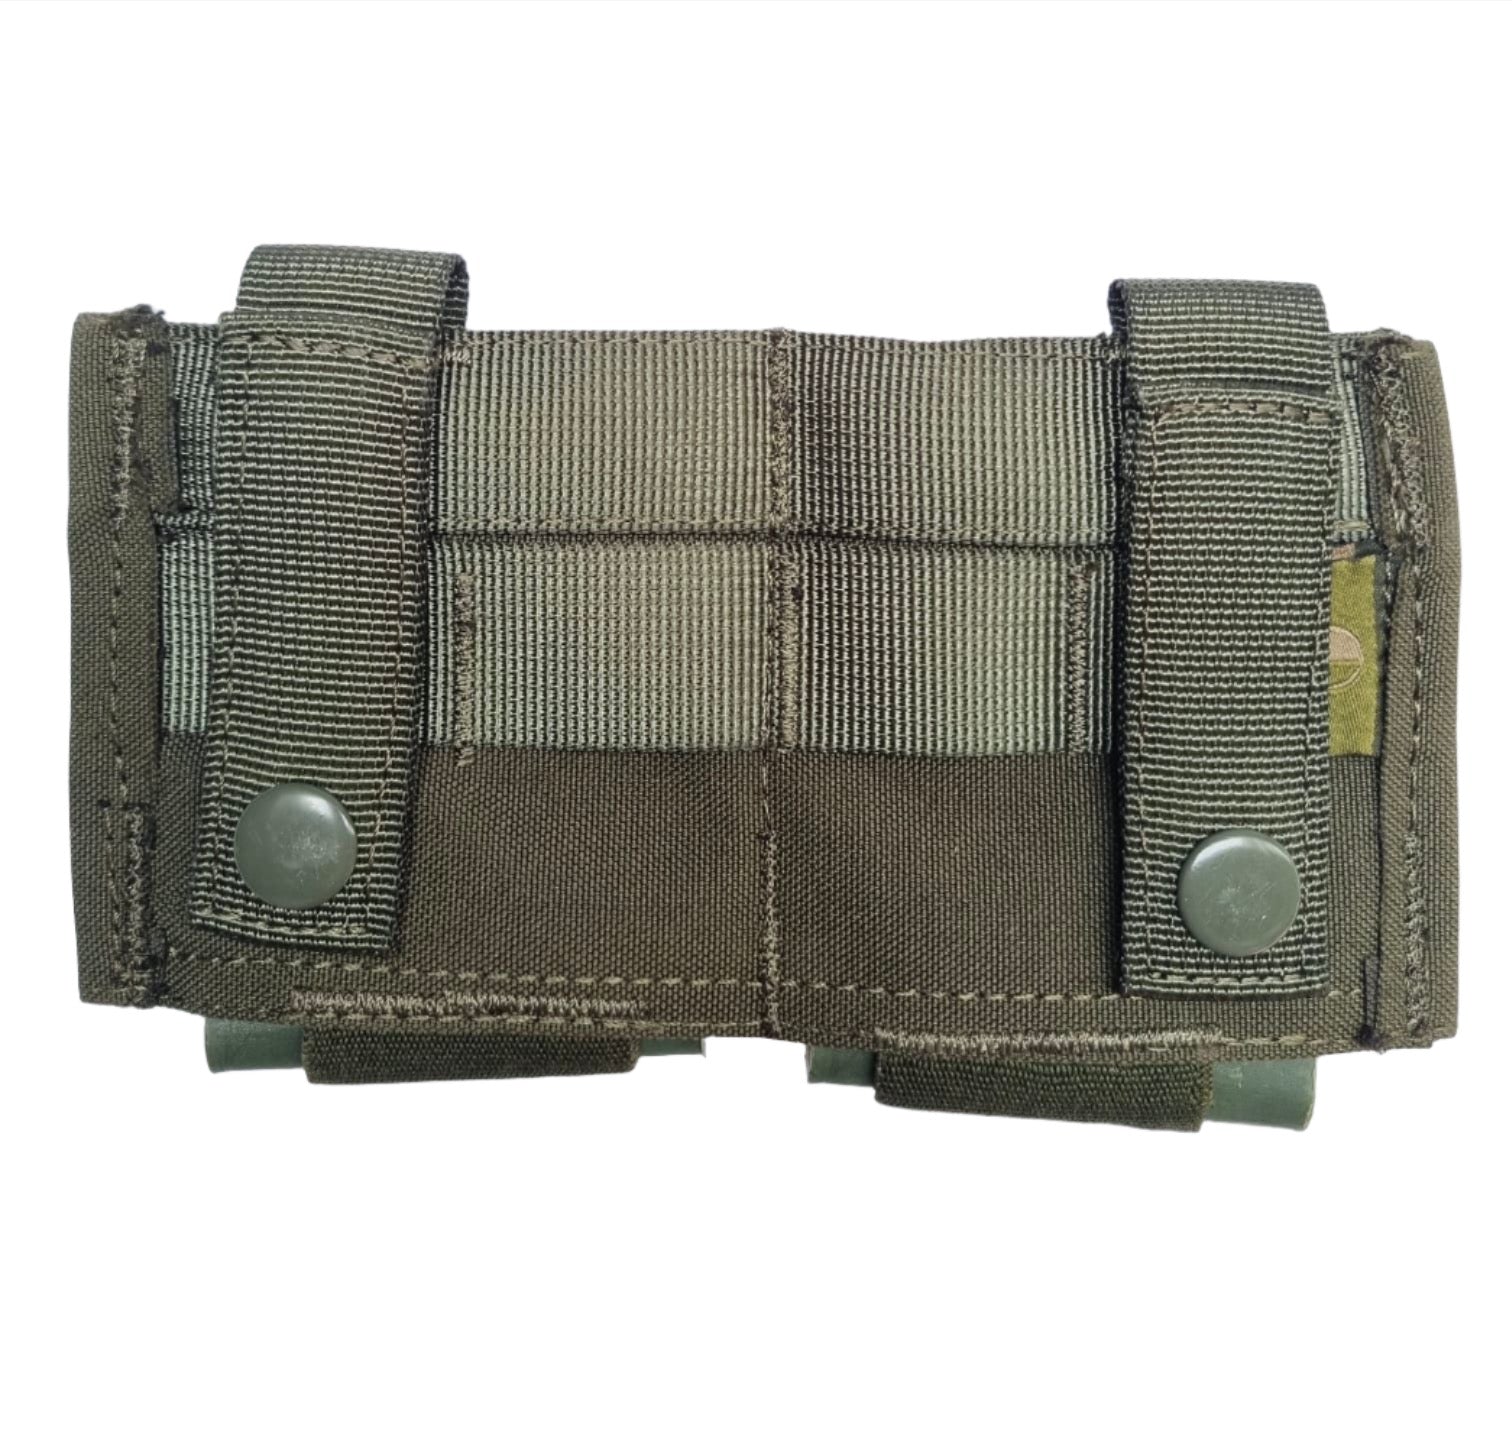 SHE-23032 GRIPTAC DOUBLE M4/M16 MAG POUCH OLIVE GREEN